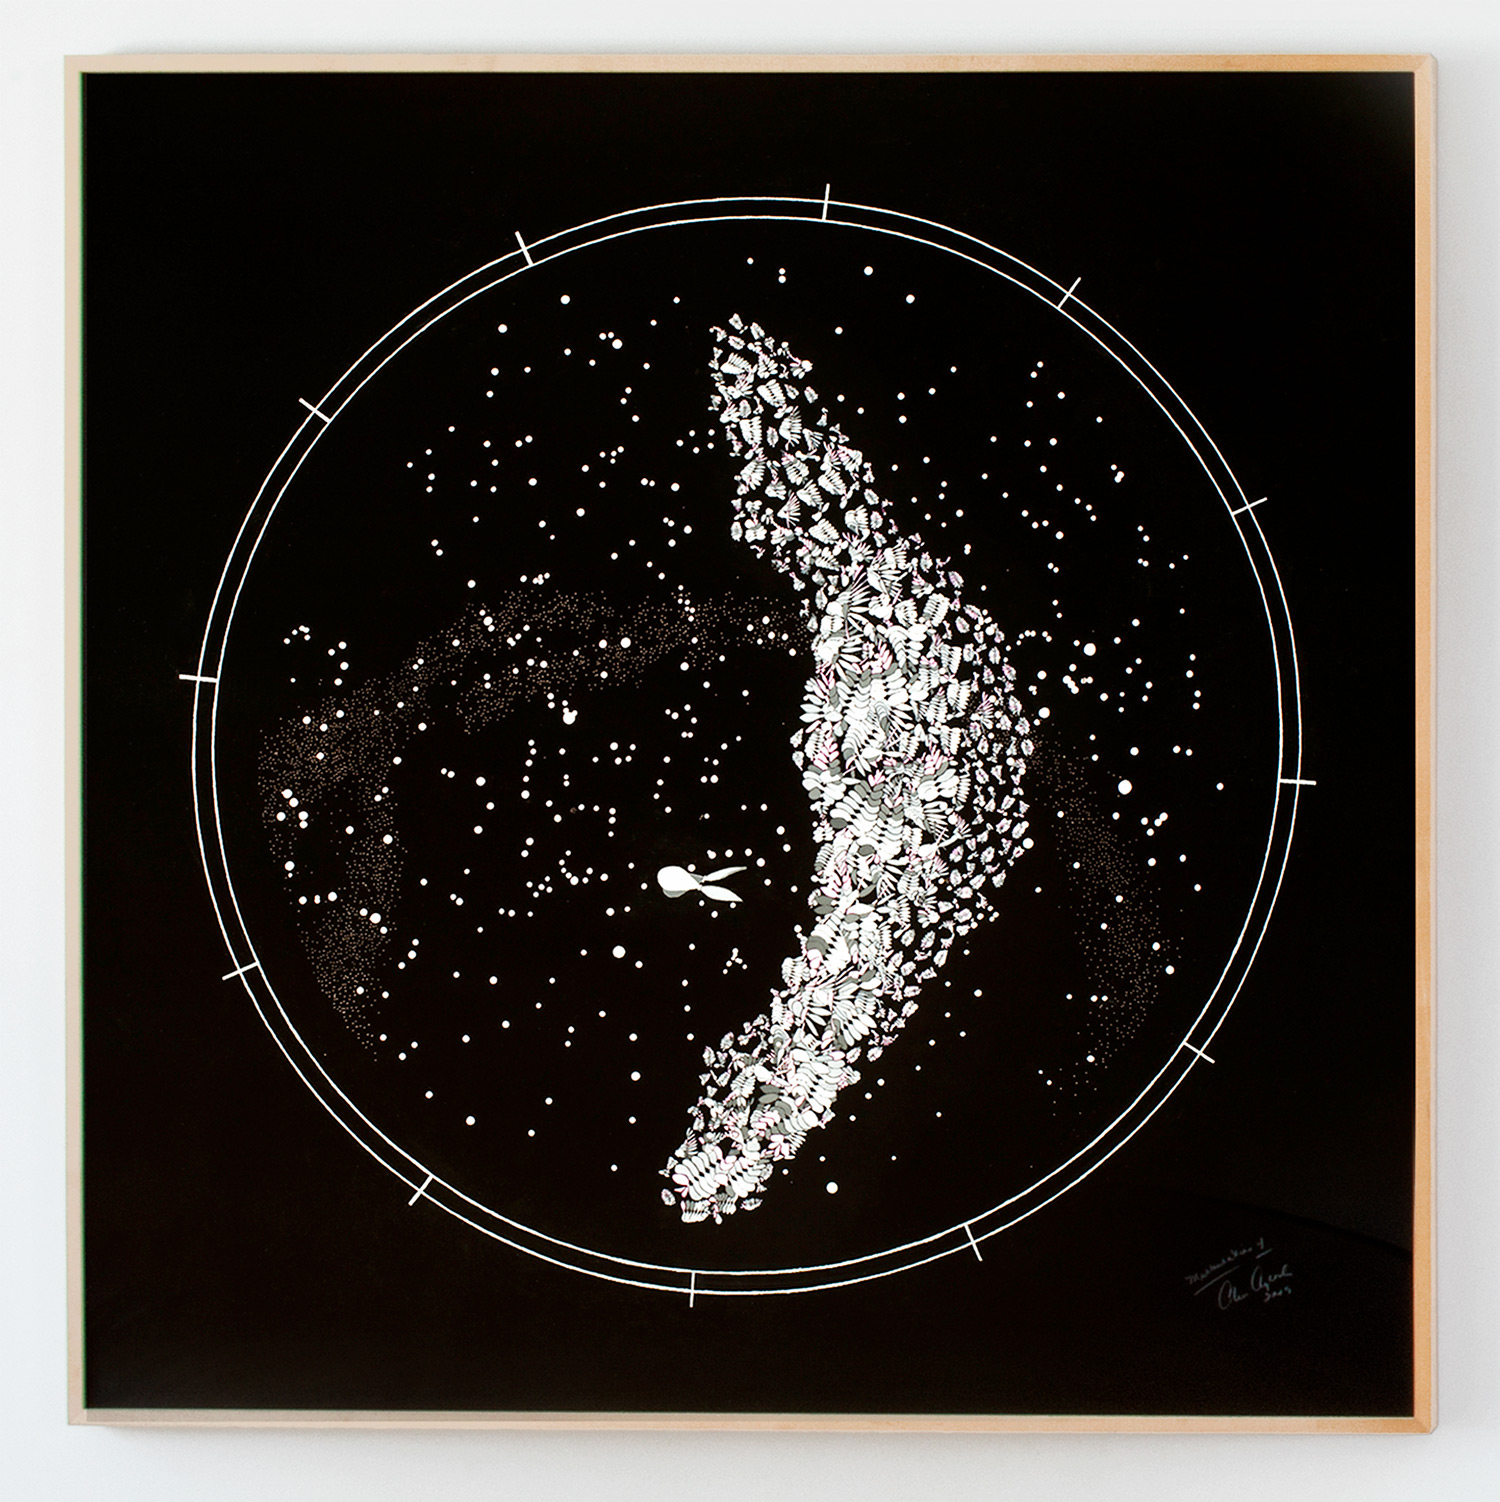 Alice Aycock
                                    'Things Pass By in the Night: Murmuration 4
                                    (from the continuing series On the Starry Night)', 2009
                                    60 x 60 Inches
                                    Ink, gouache, and colored pencil on paper
                                    